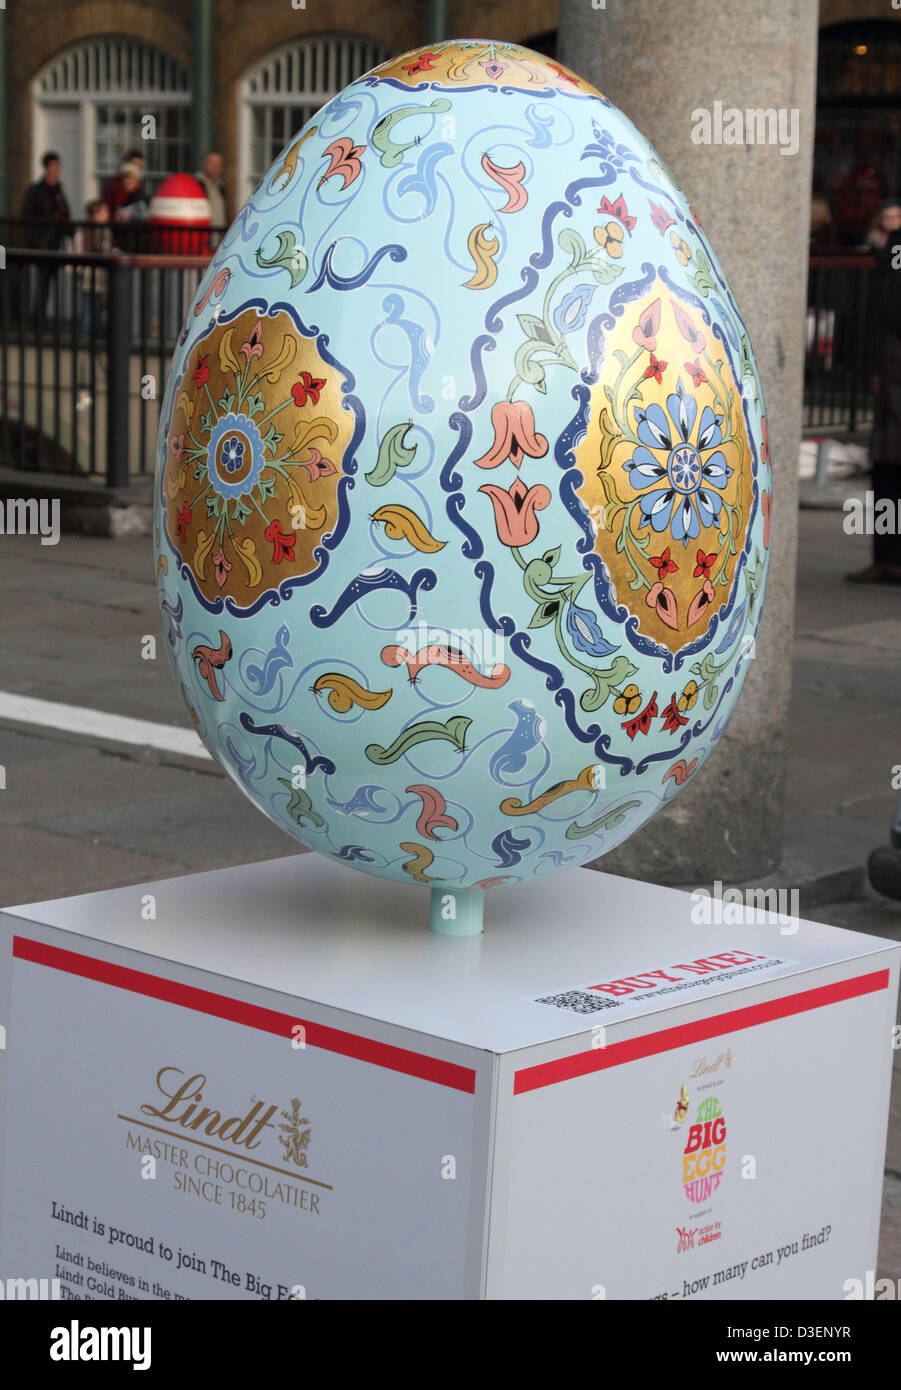 London - Over 100 giant Easter eggs designed by a variety of artists were  on display for the final time in London's Covent Garden Piazza before  setting off to tour the UK